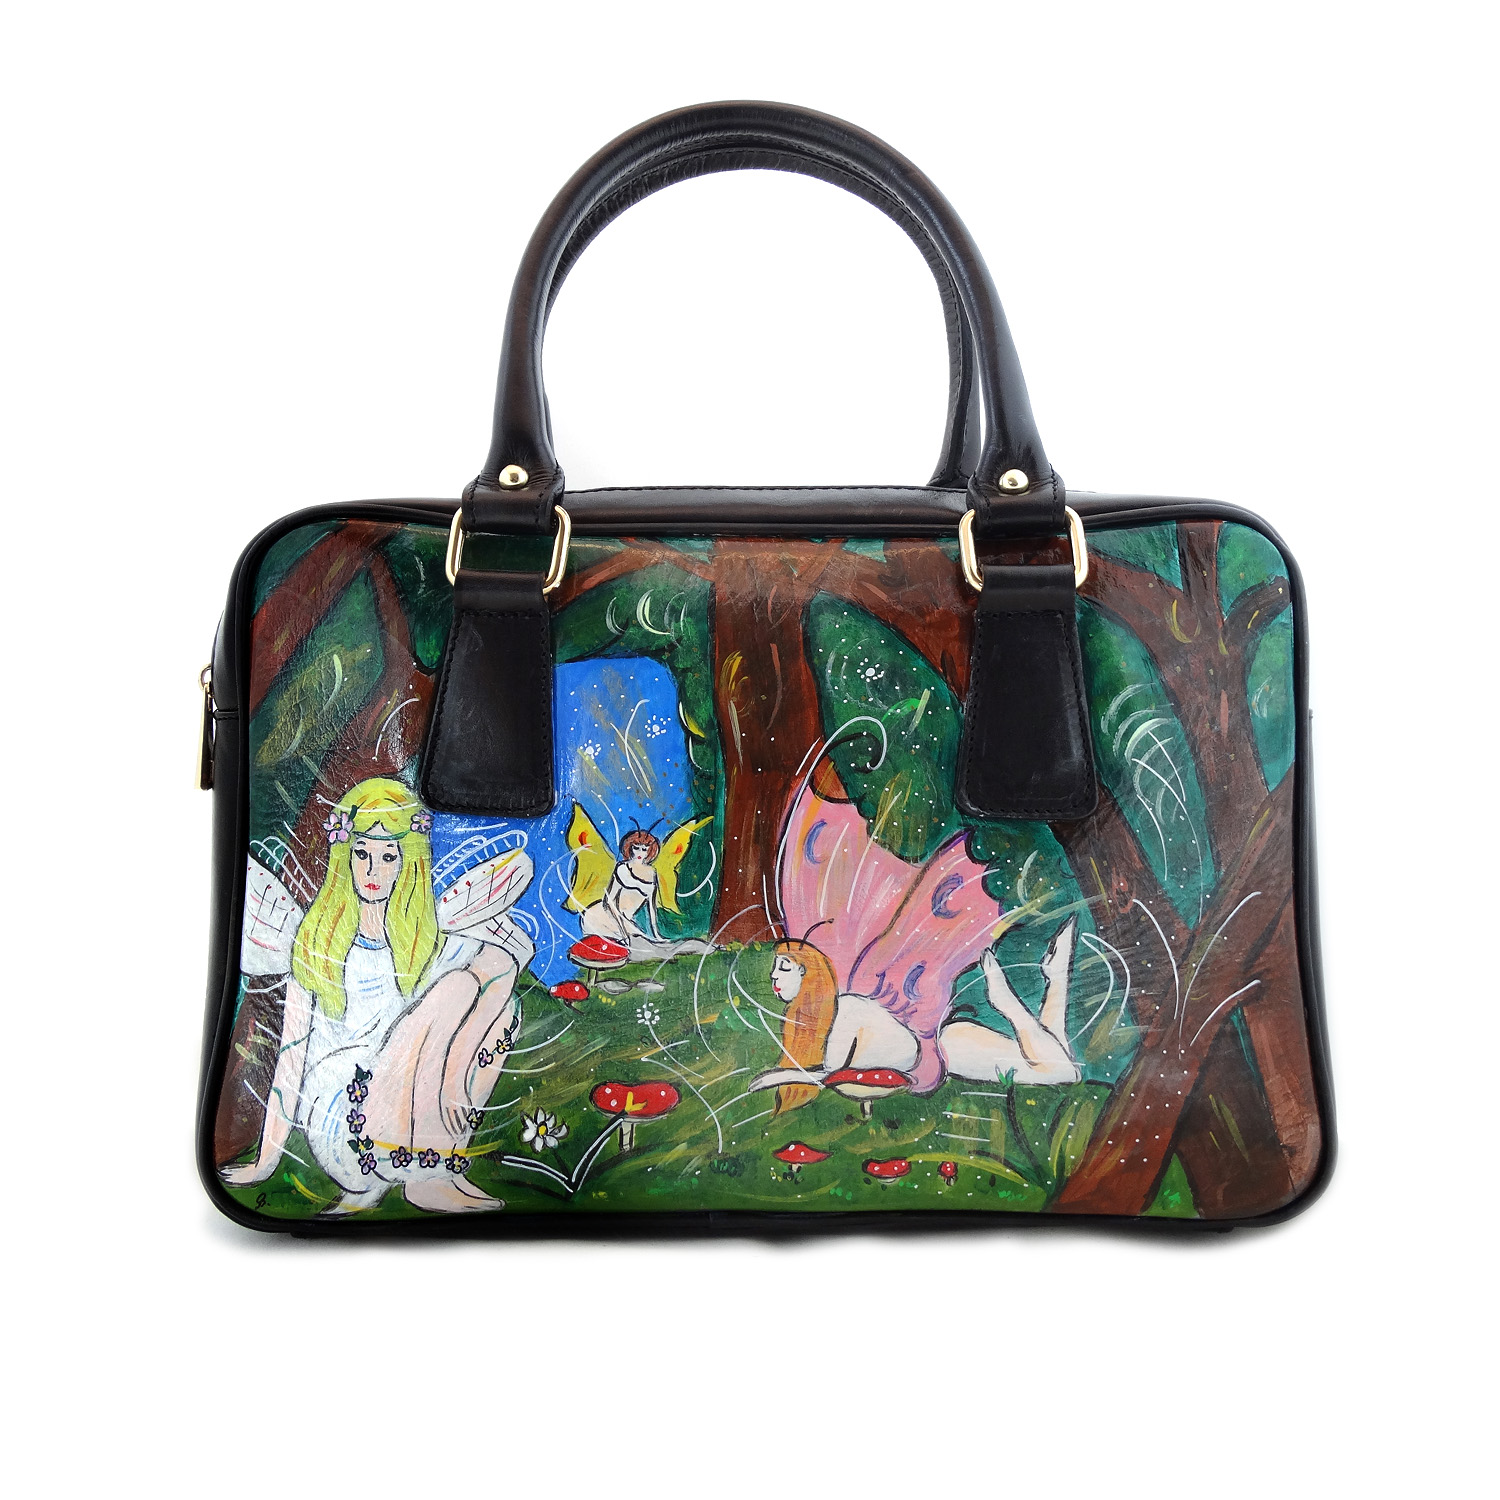 Hand painted bag - The forest fairy